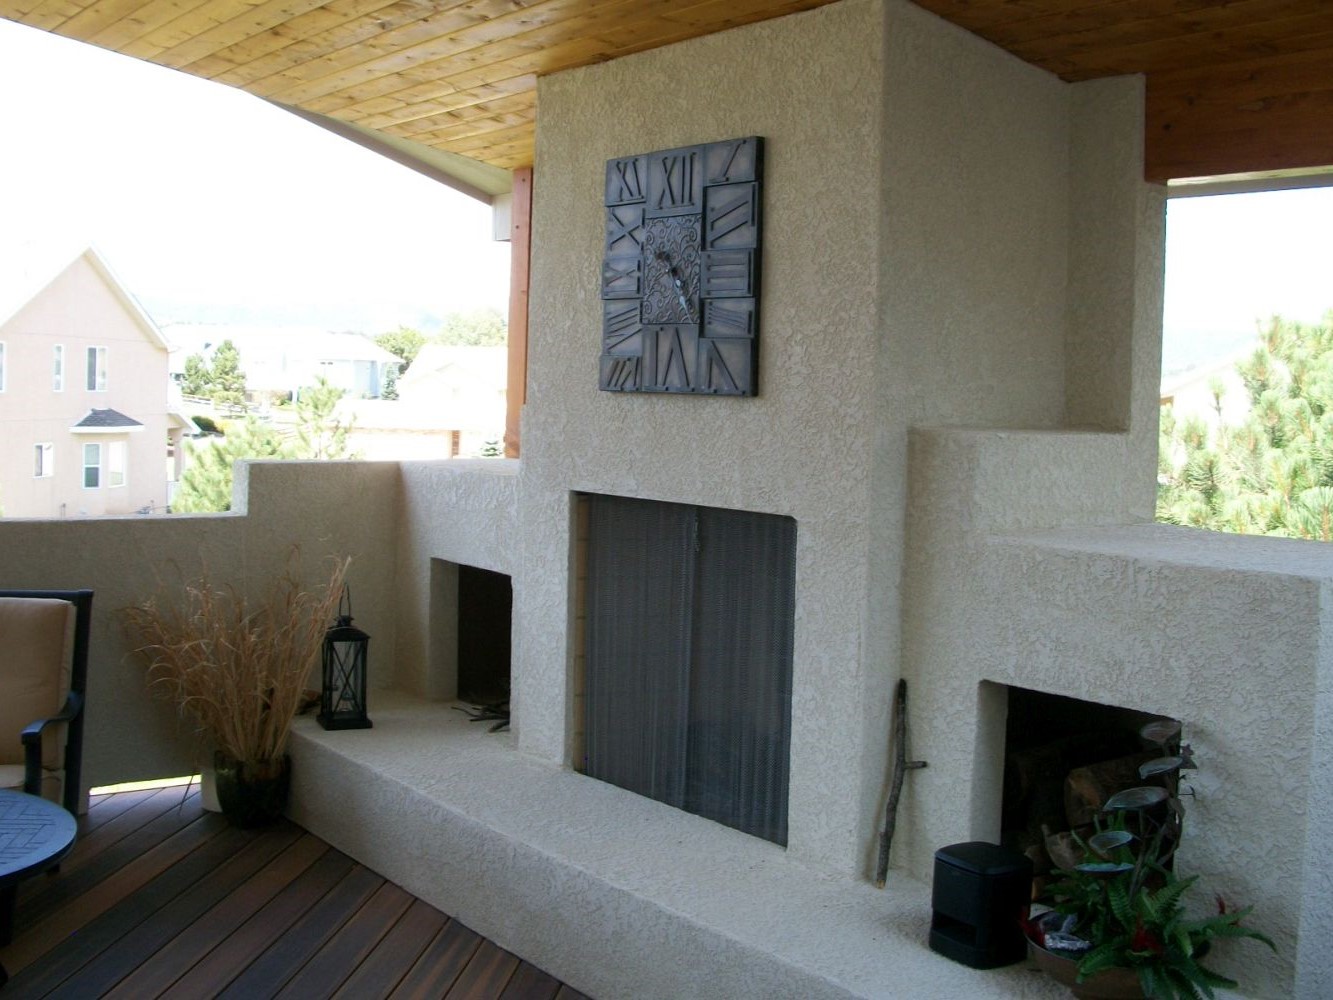 Covered, composite deck with a custom-built wood-burning stucco fireplace.